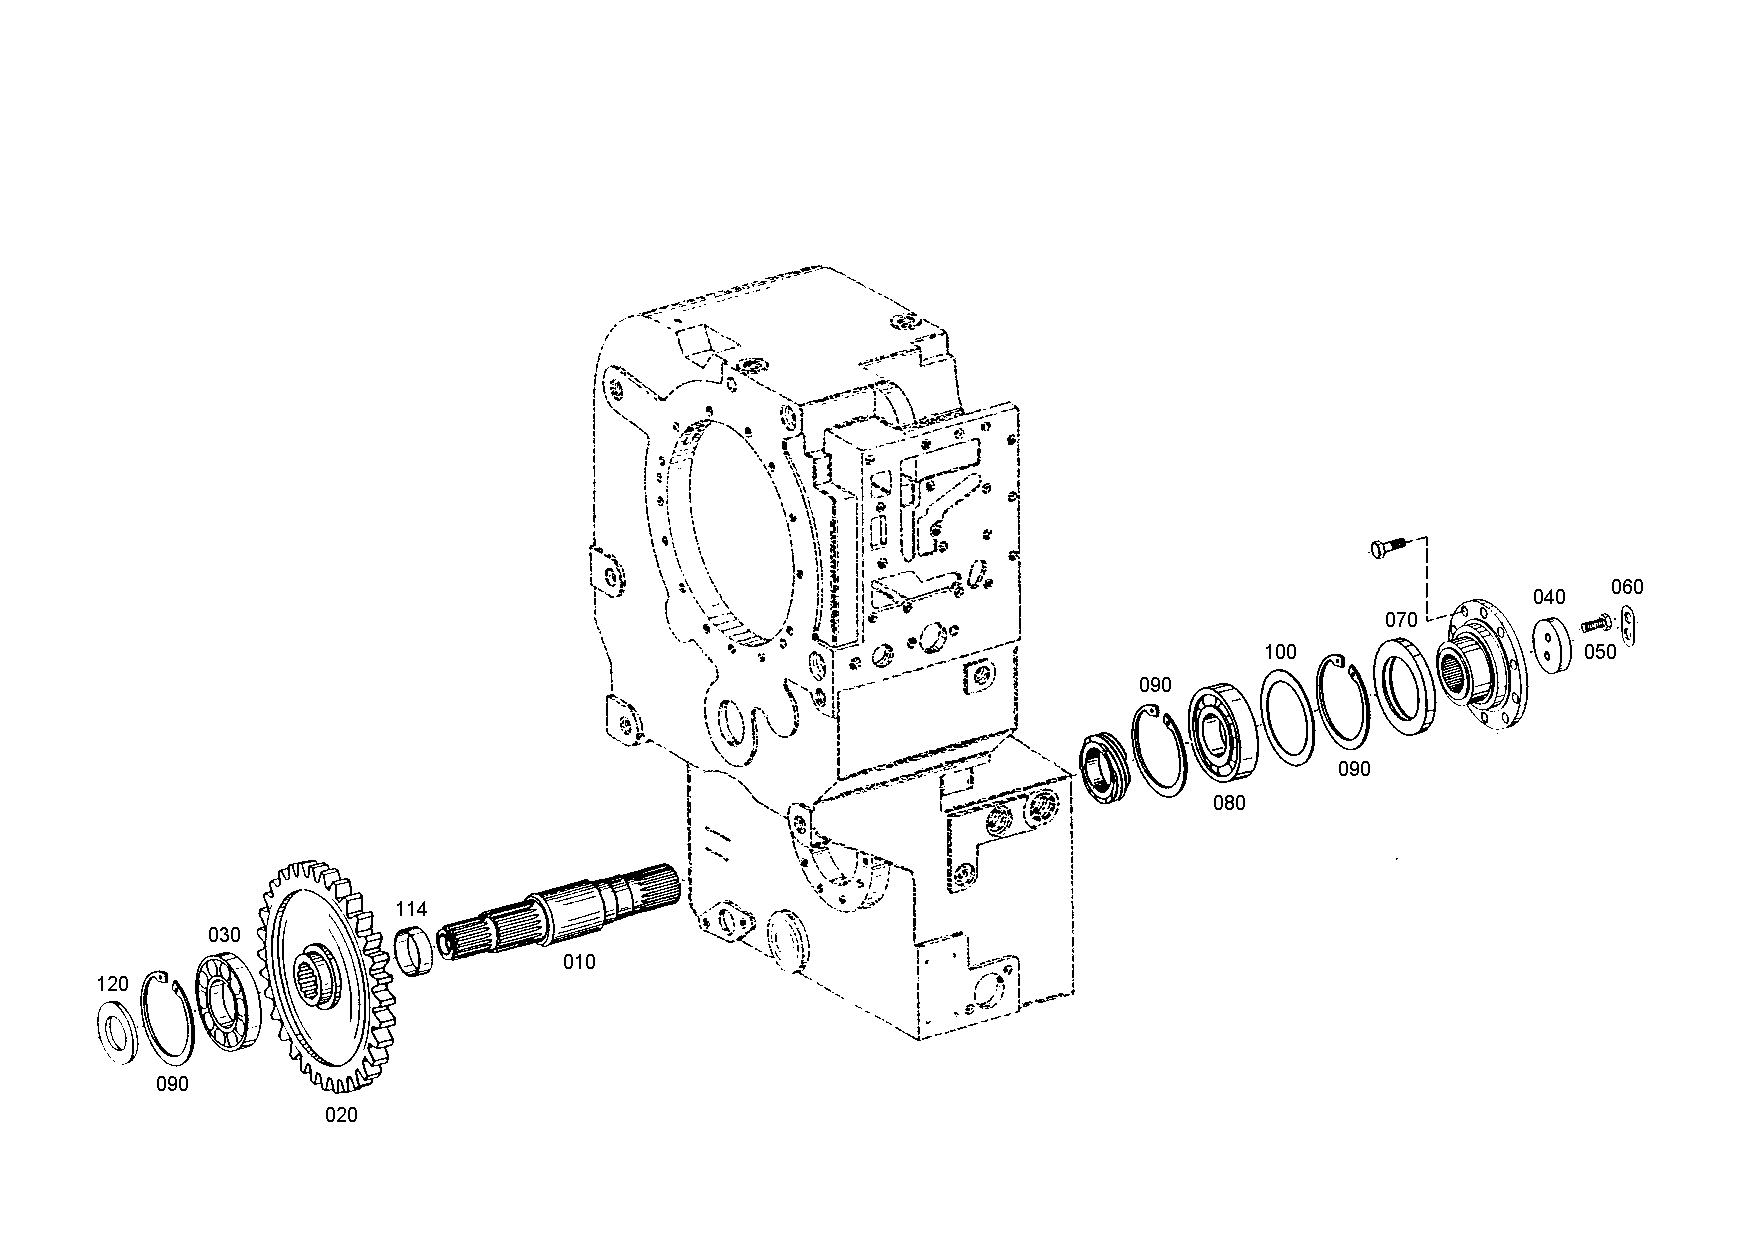 drawing for GROVE 02252776 - SHAFT SEAL (figure 2)